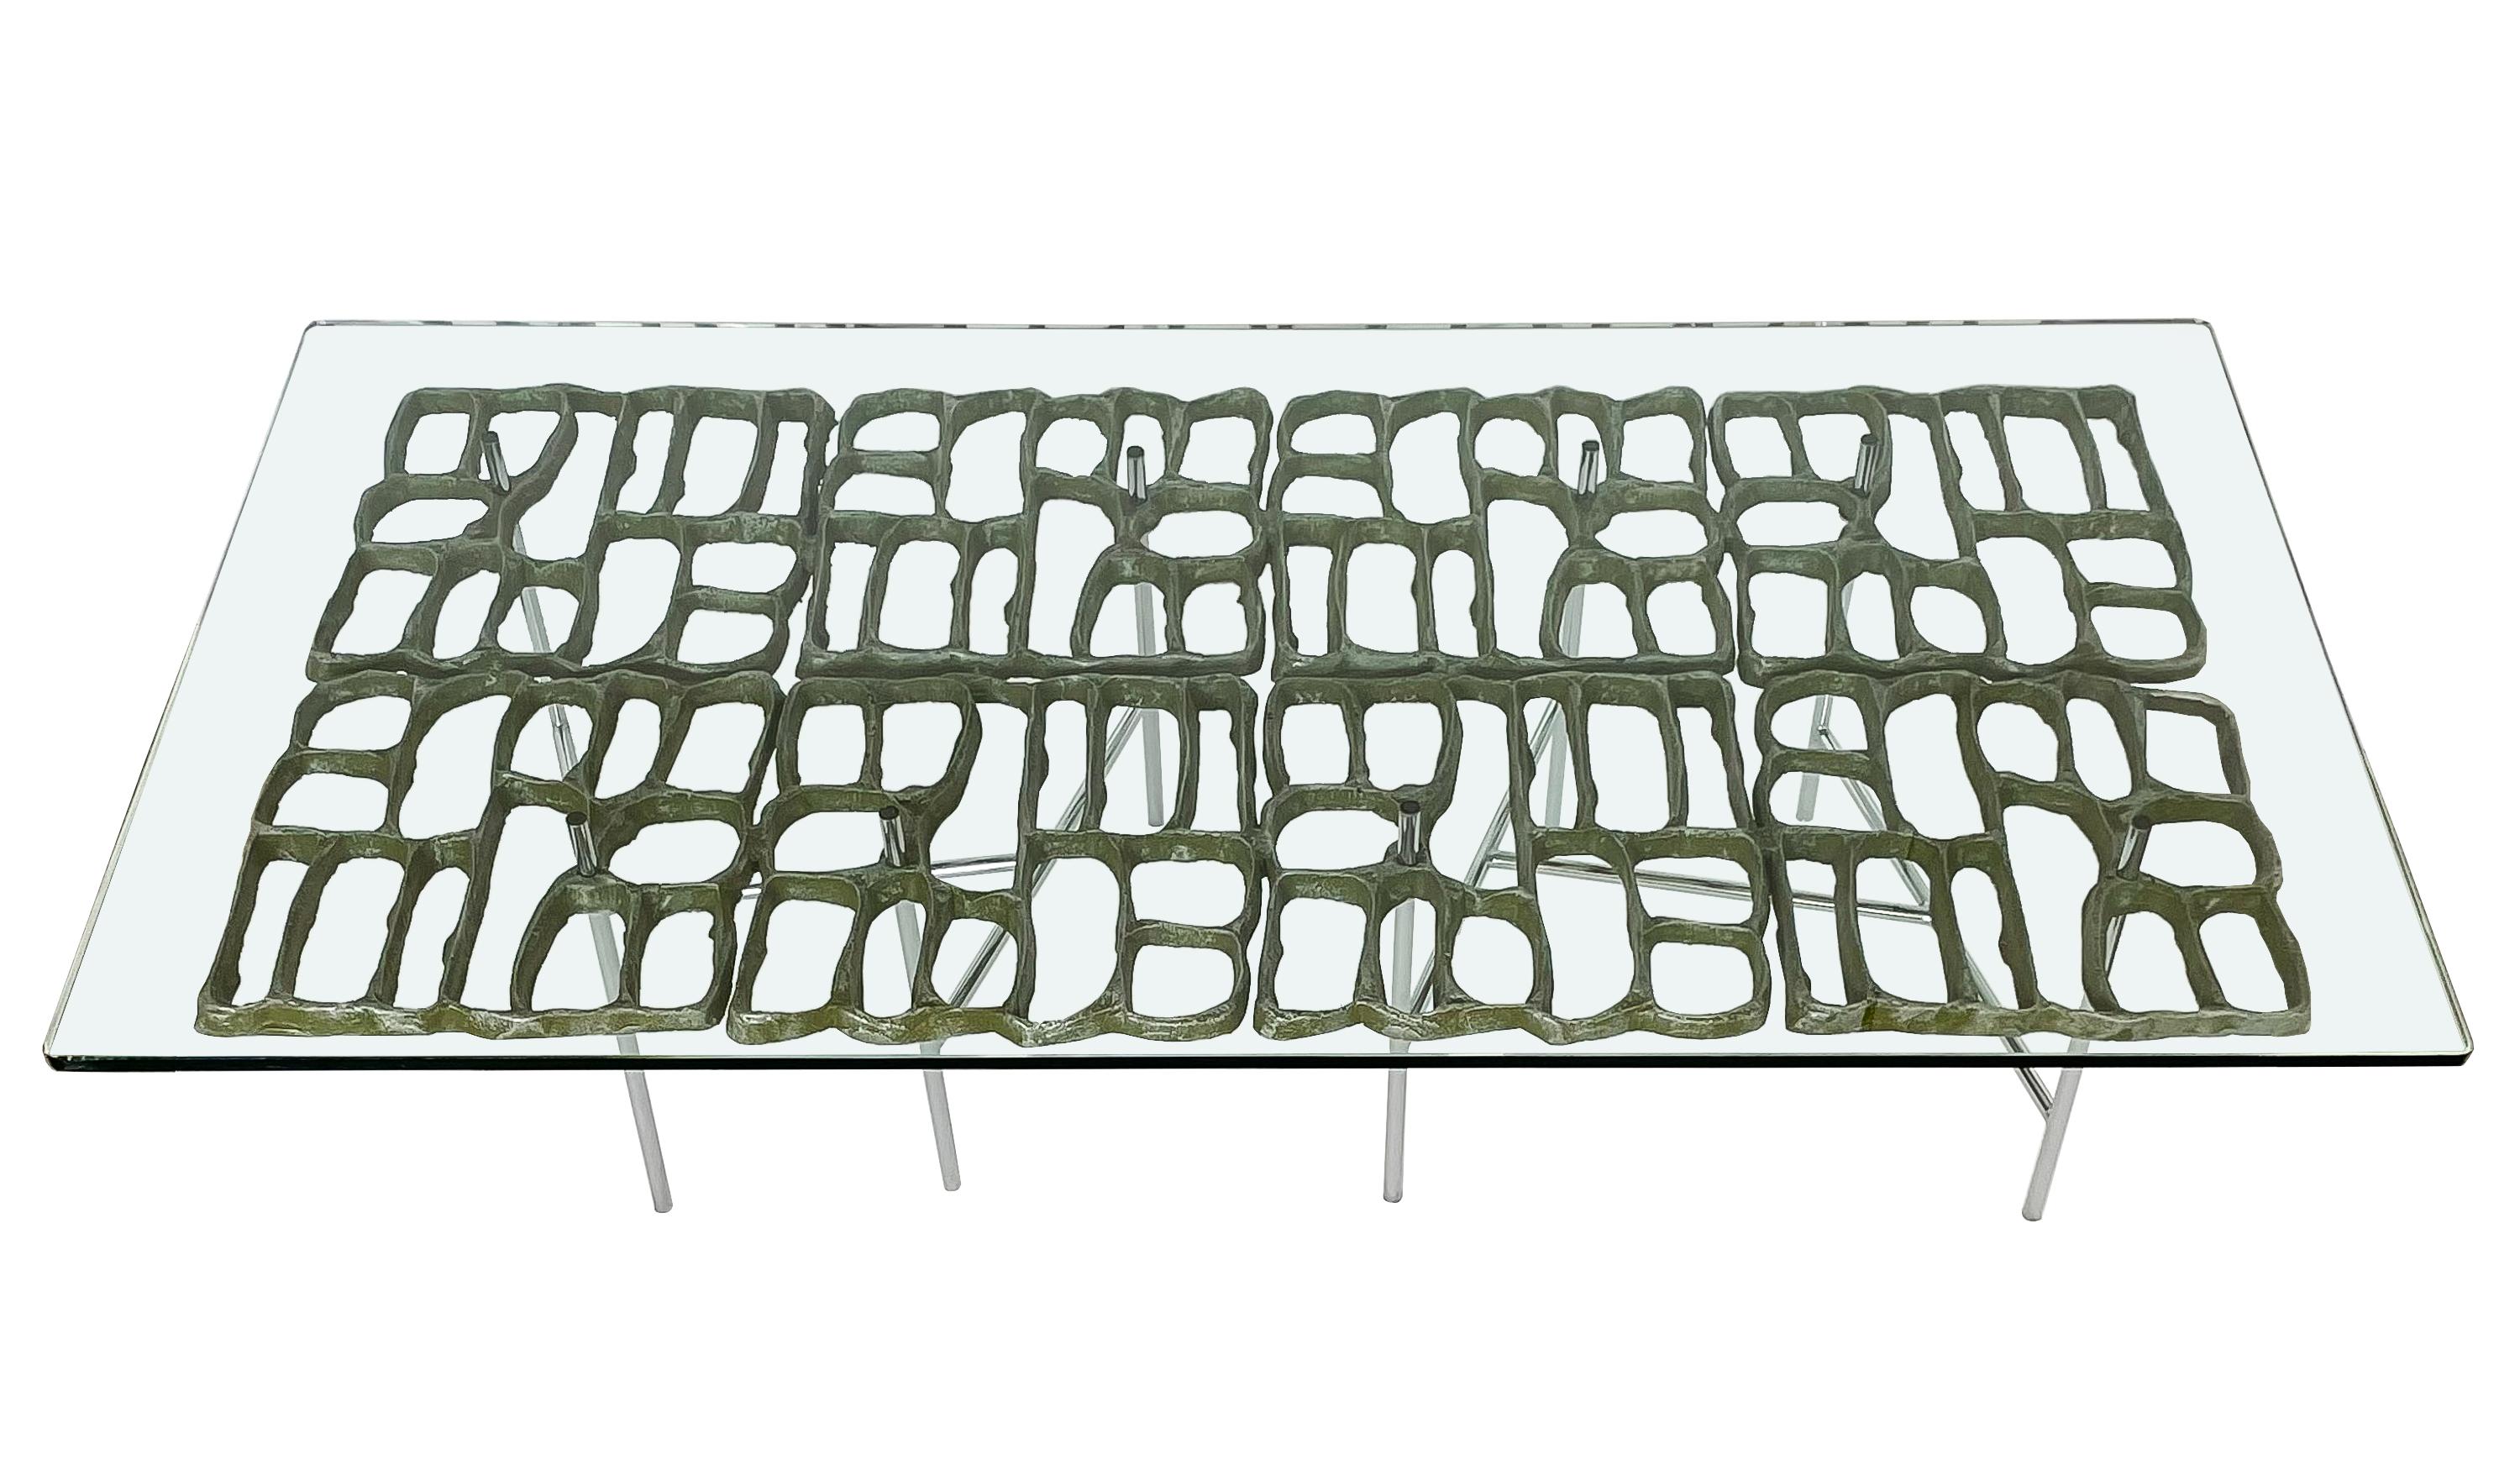 Brutalist sculptural cast aluminum coffee table by Donald Drumm, circa 1960s. This coffee table features an abstract cast aluminum open fretwork design with an applied patina in a beautiful dark green verdigris. The patina is washed over the